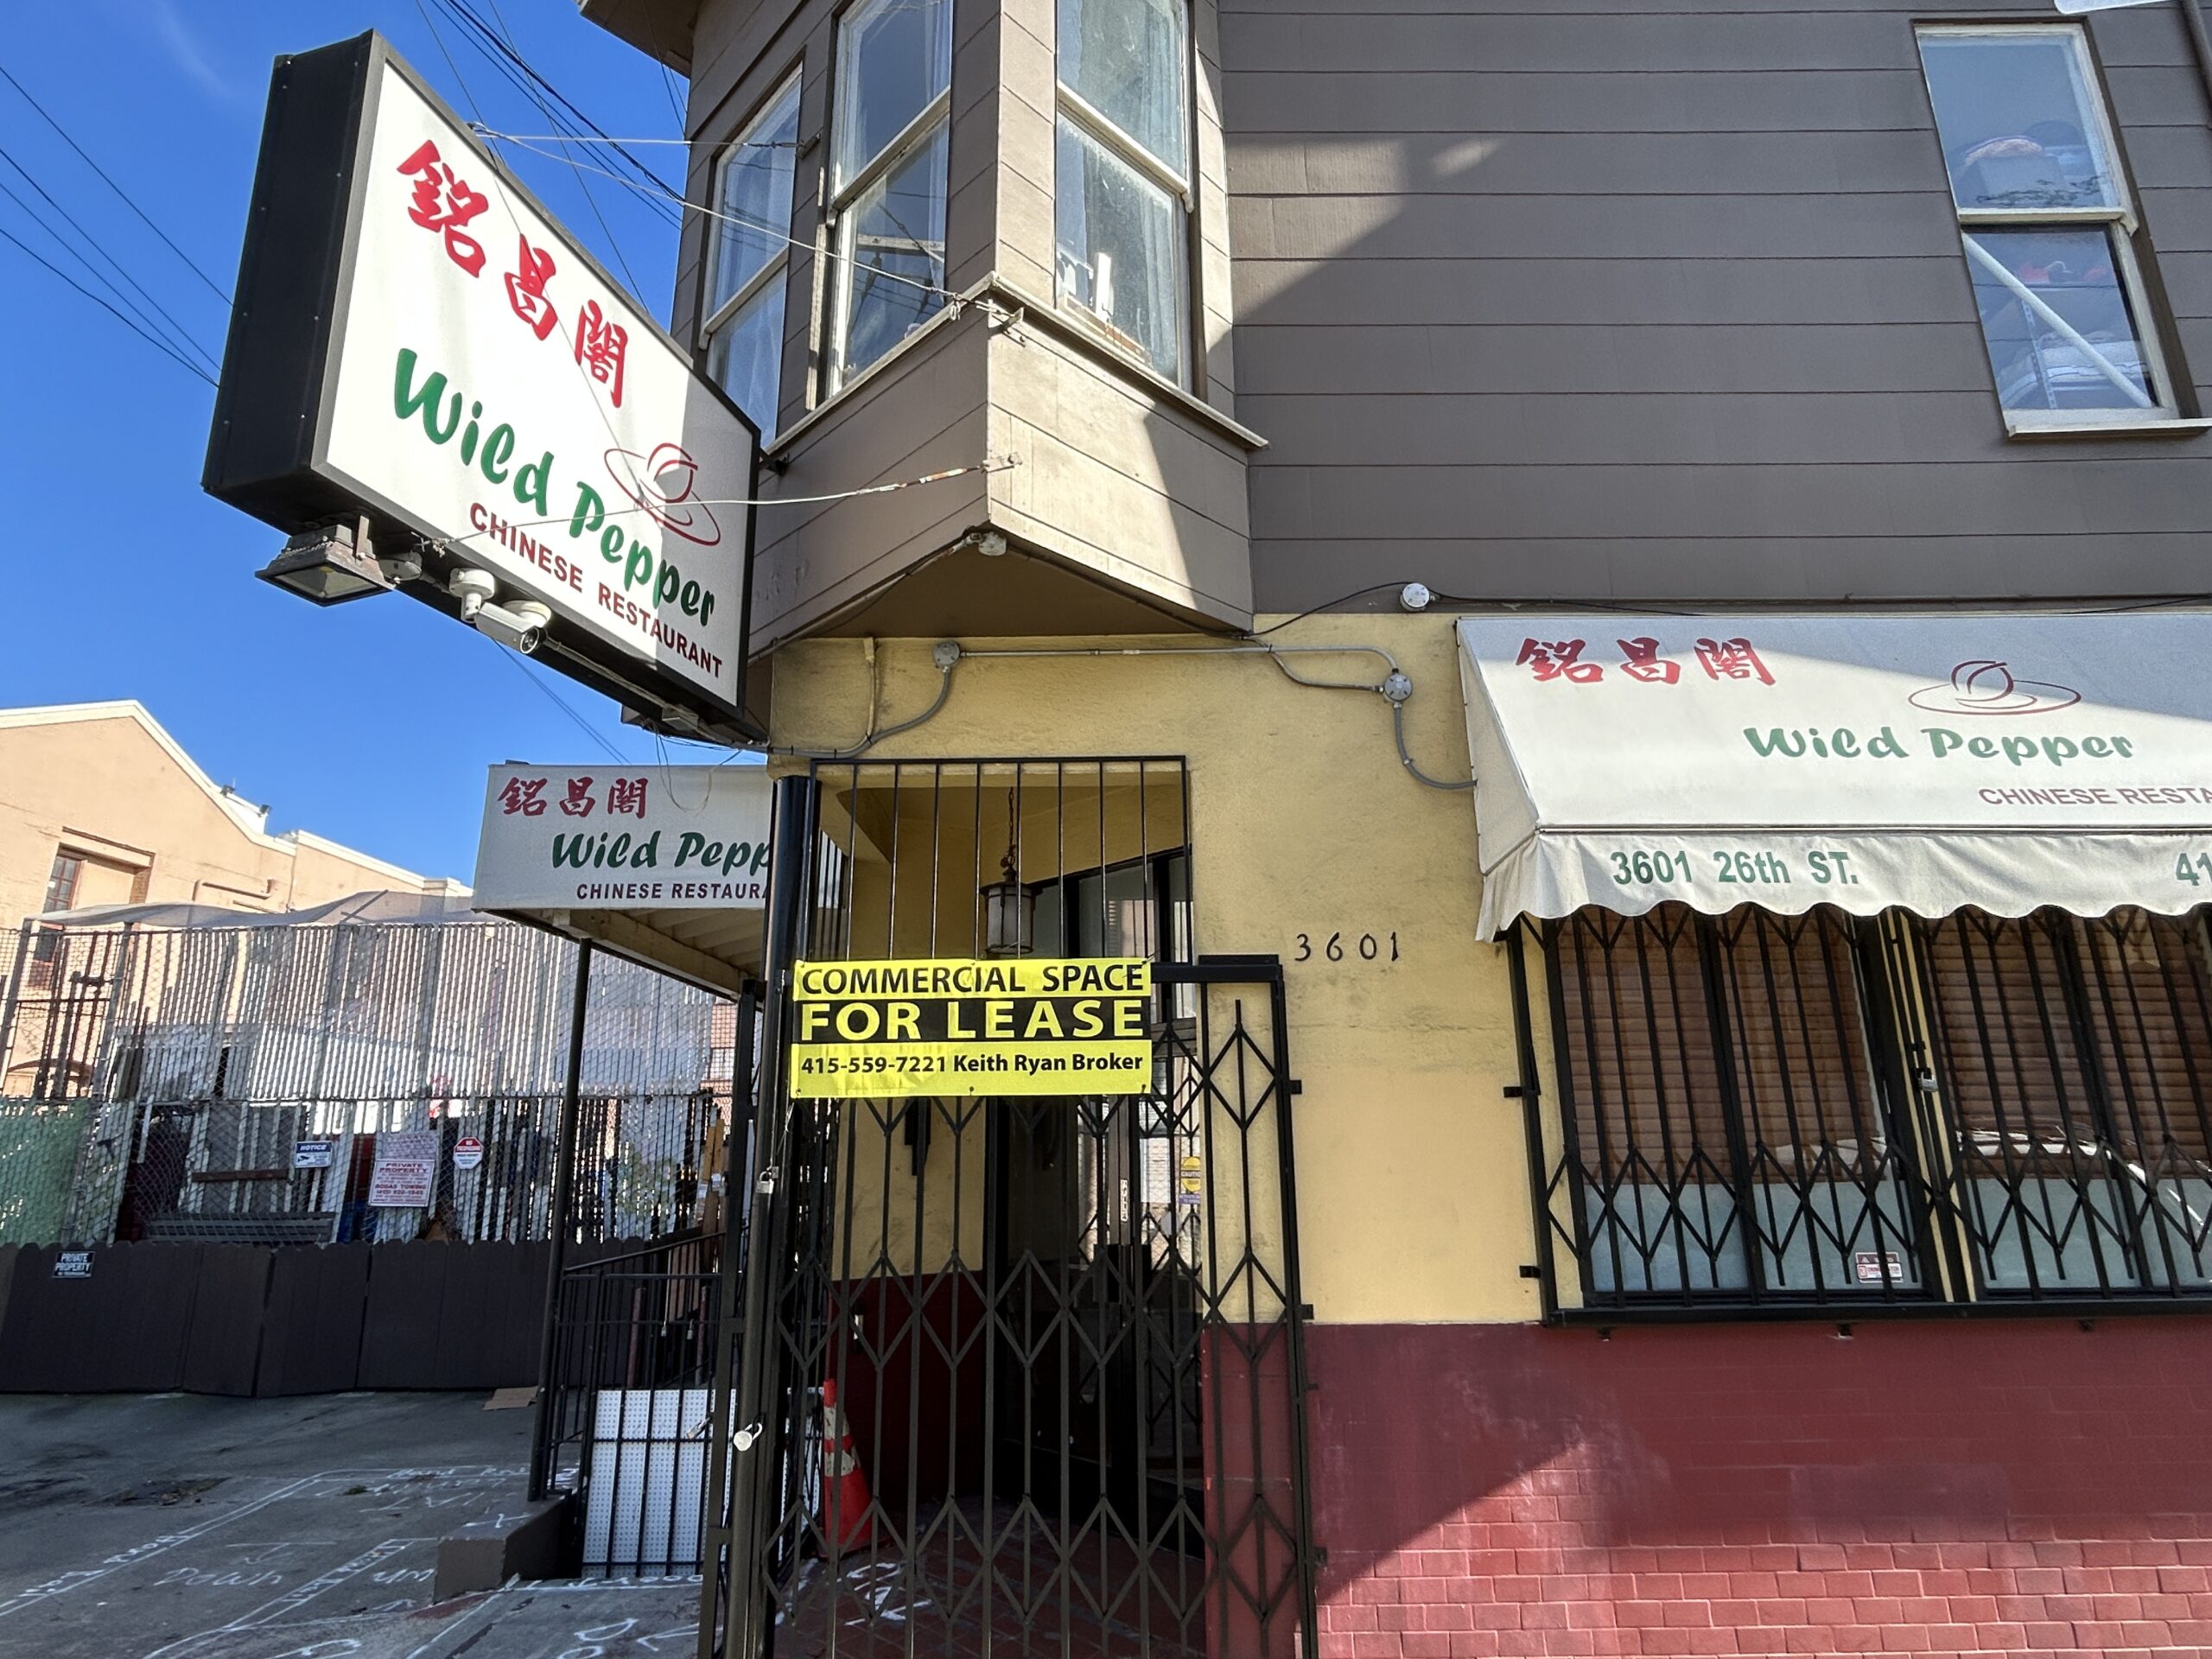 Popular Neighborhood Chinese Restaurant Bordering the Mission Quietly Shutters